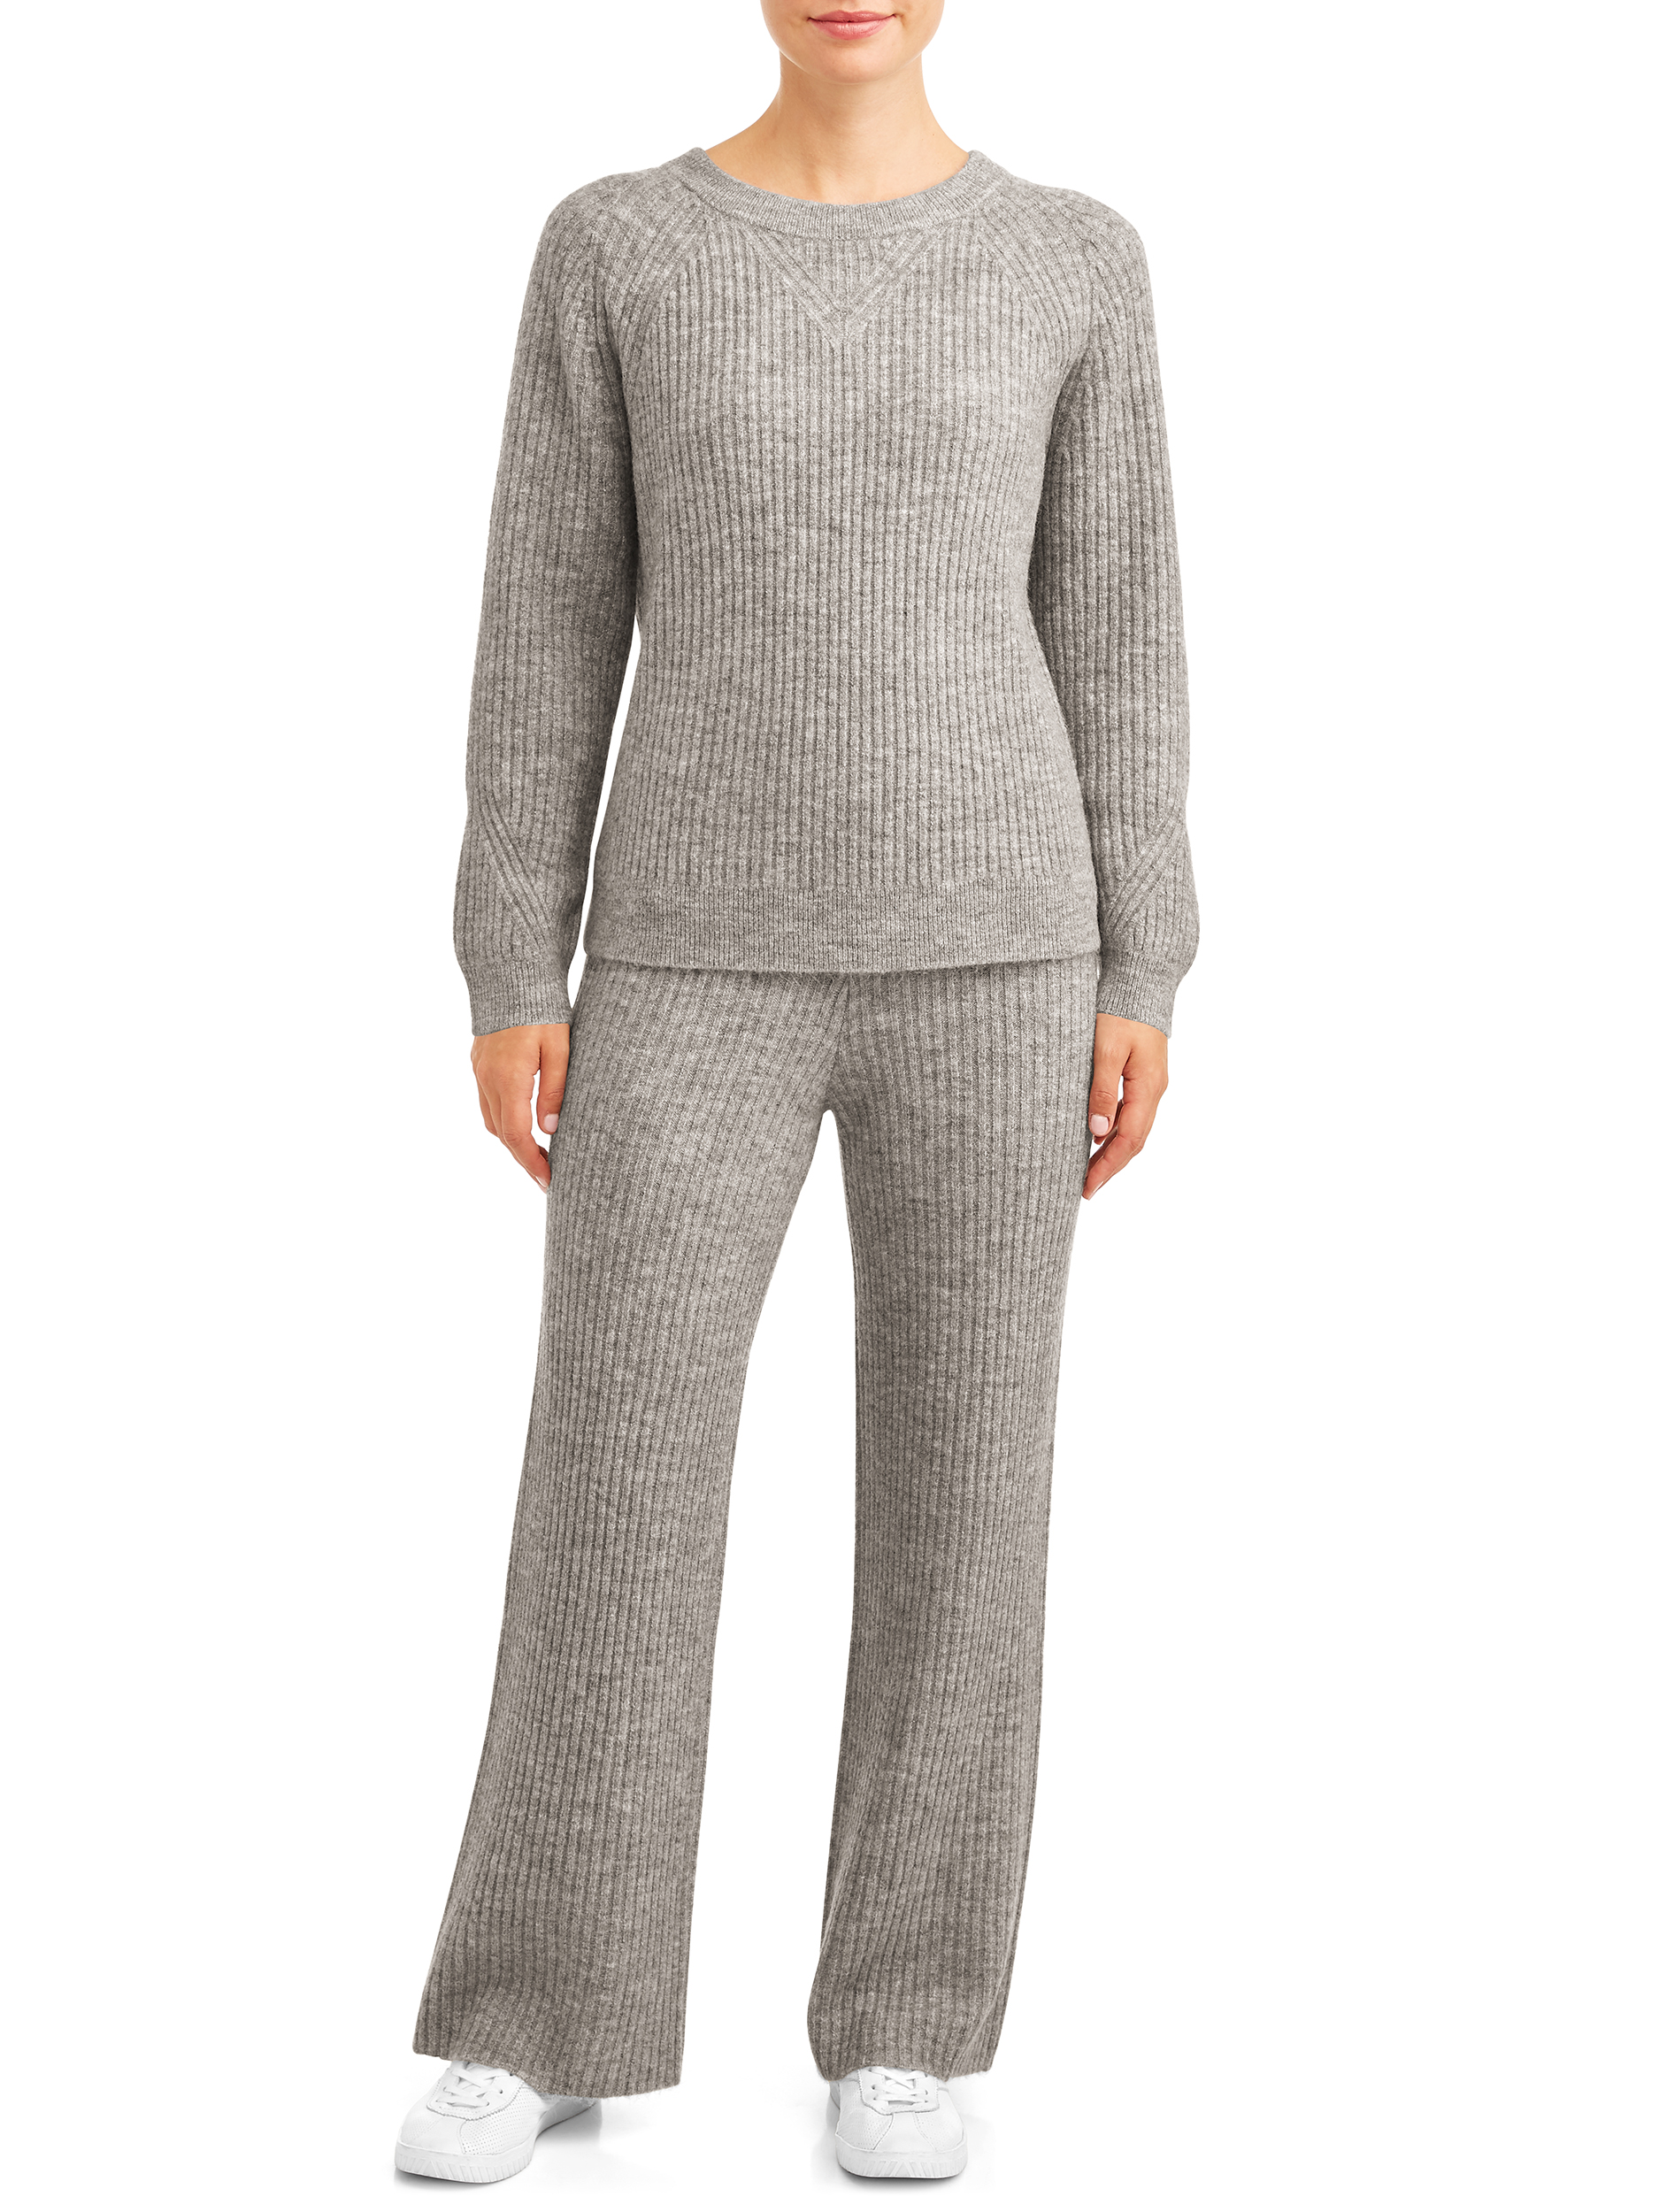 Time and Tru Women's Cozy Ribbed Sweater - image 3 of 5